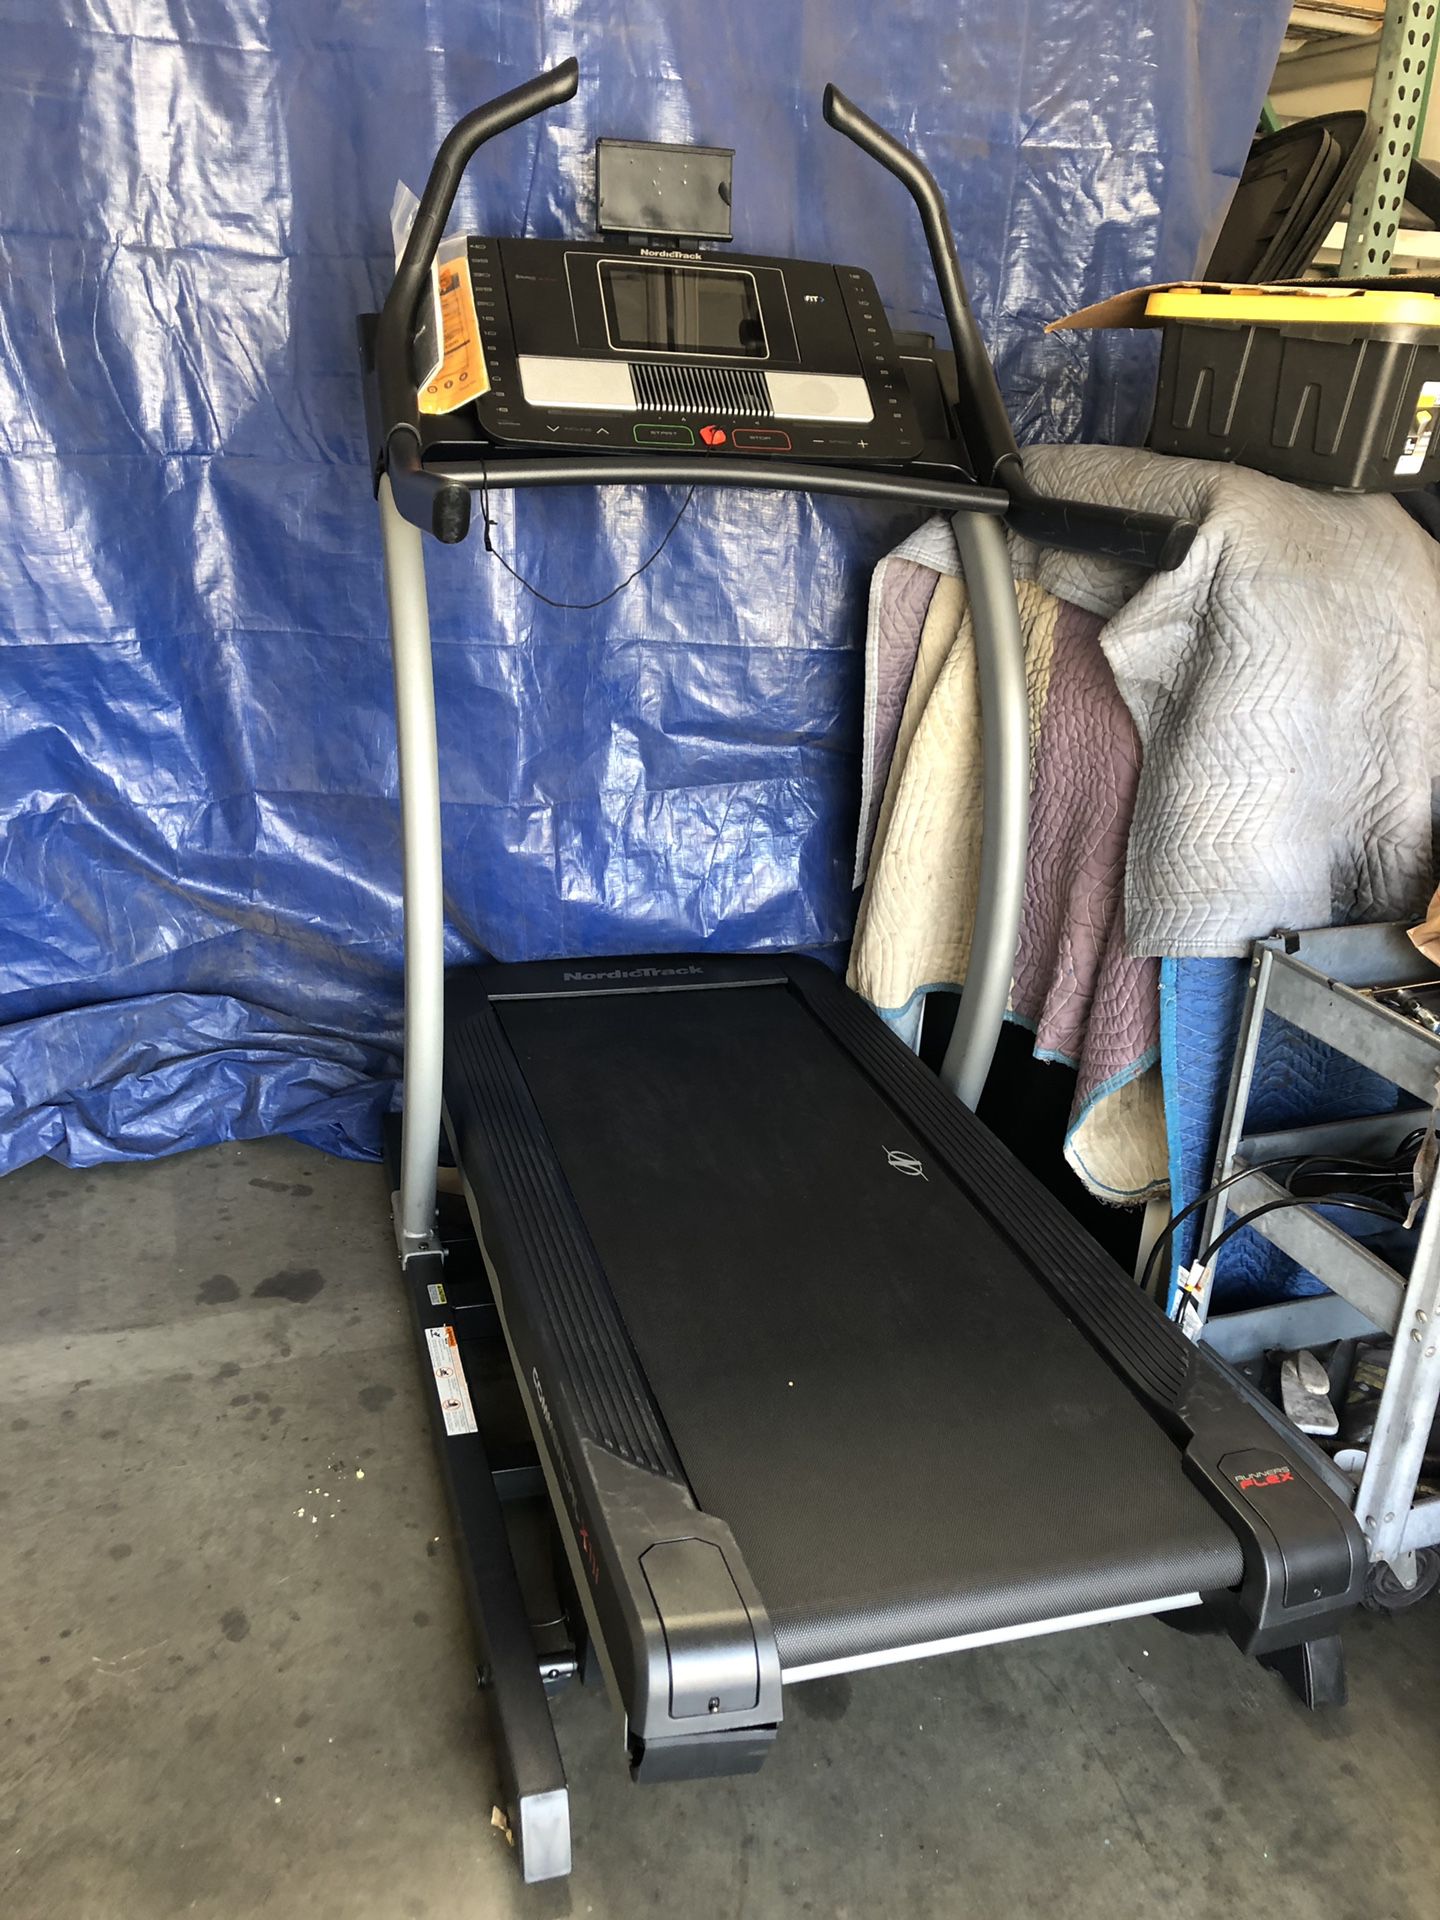 Nordictrack commercial x11i treadmill/ brand new